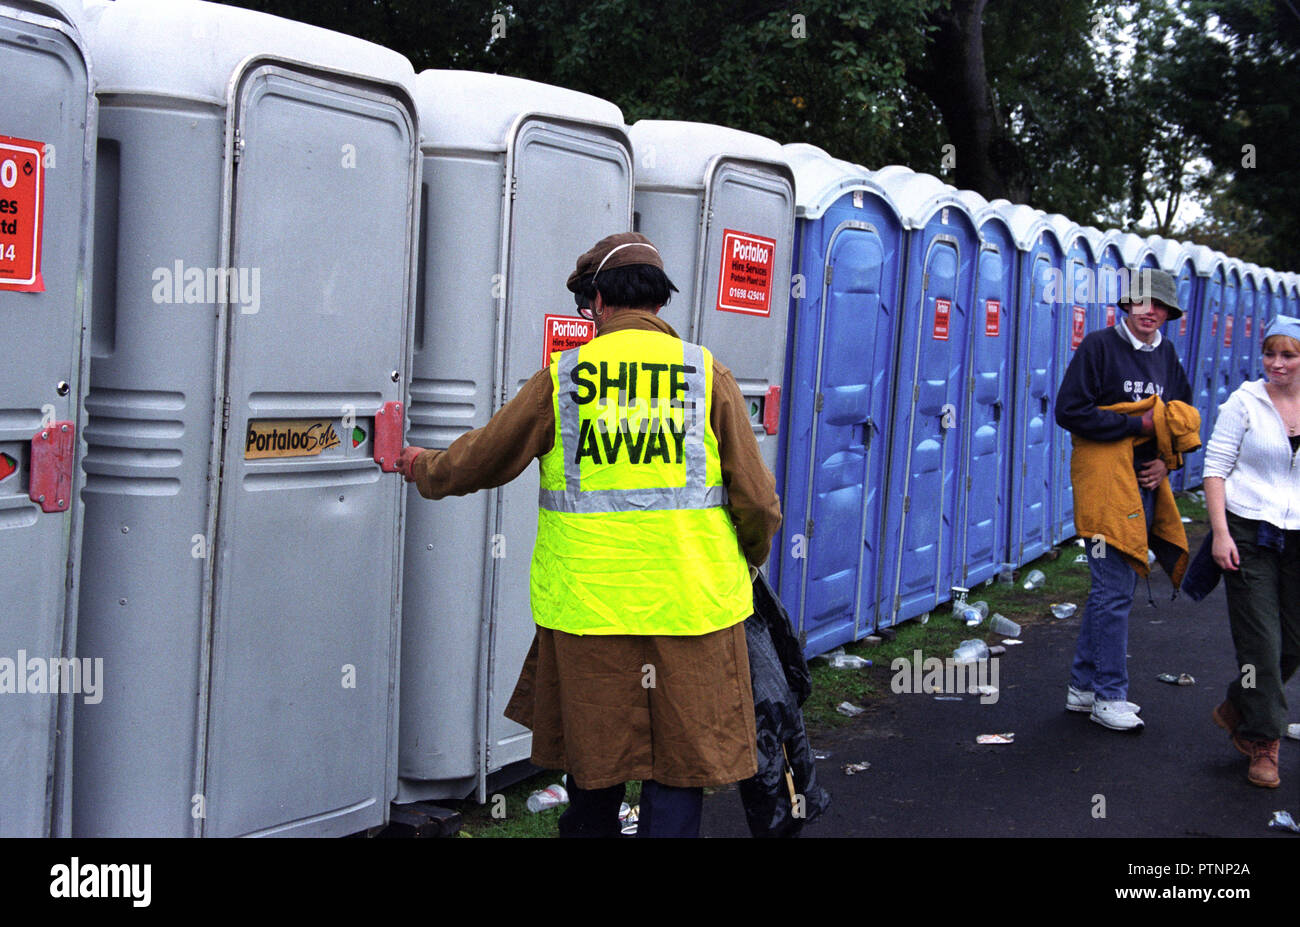 A toilet attendant cleaning out thetoilets at pop festival somewhere and wearing a rather cheeky vest! Alan Wylie/ALAMY © Stock Photo